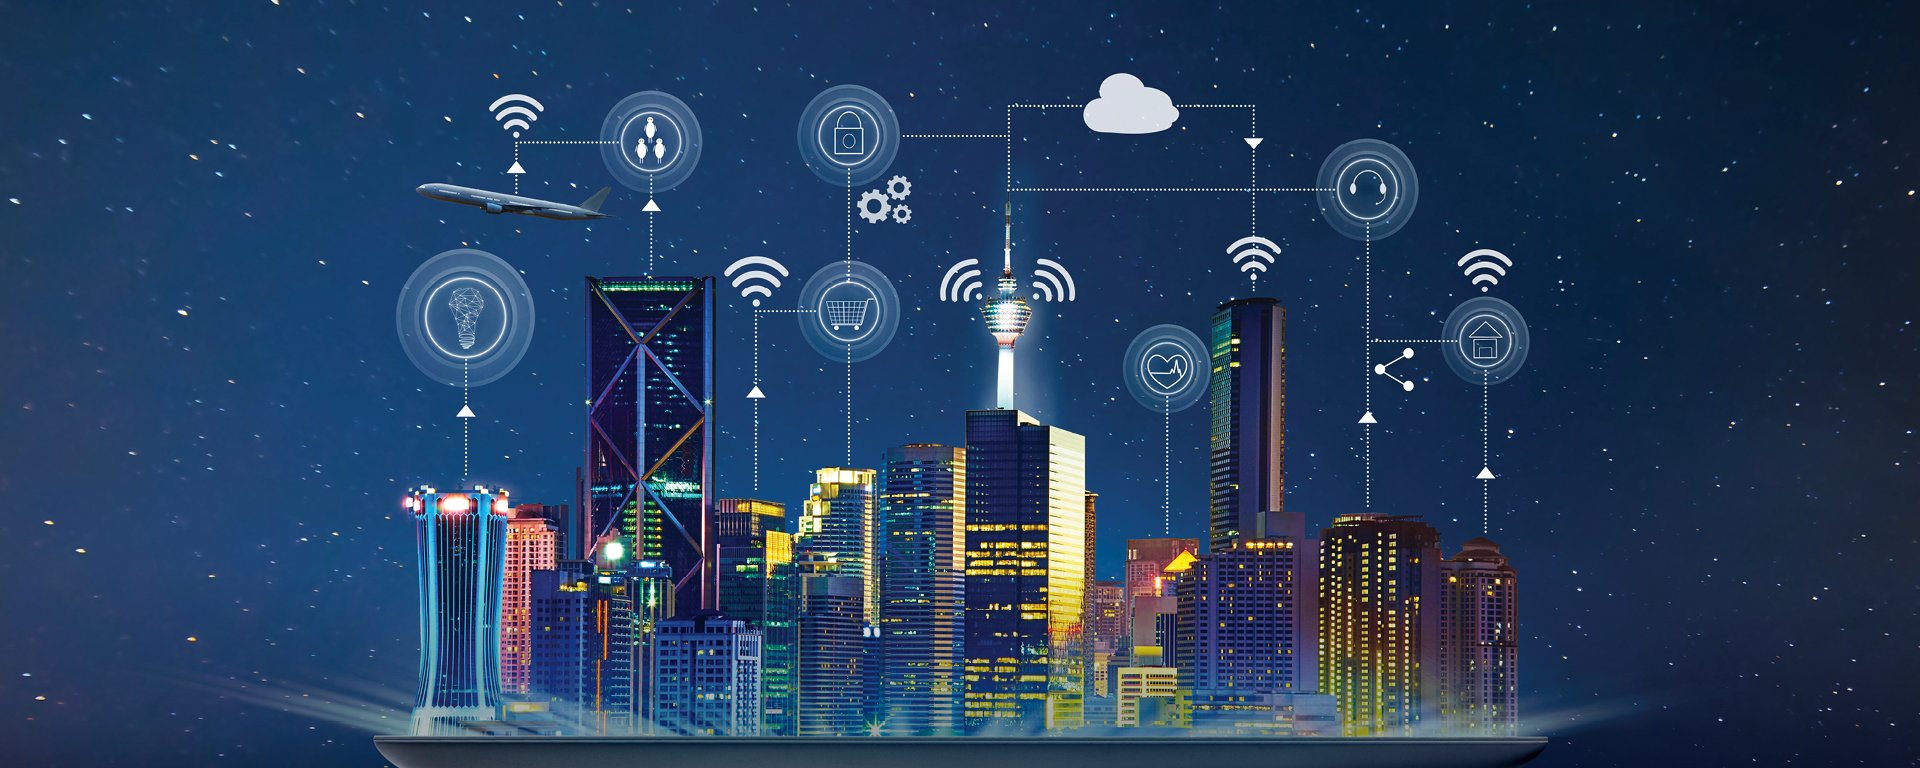 Illustration of a city with digital icons floating over buildings.